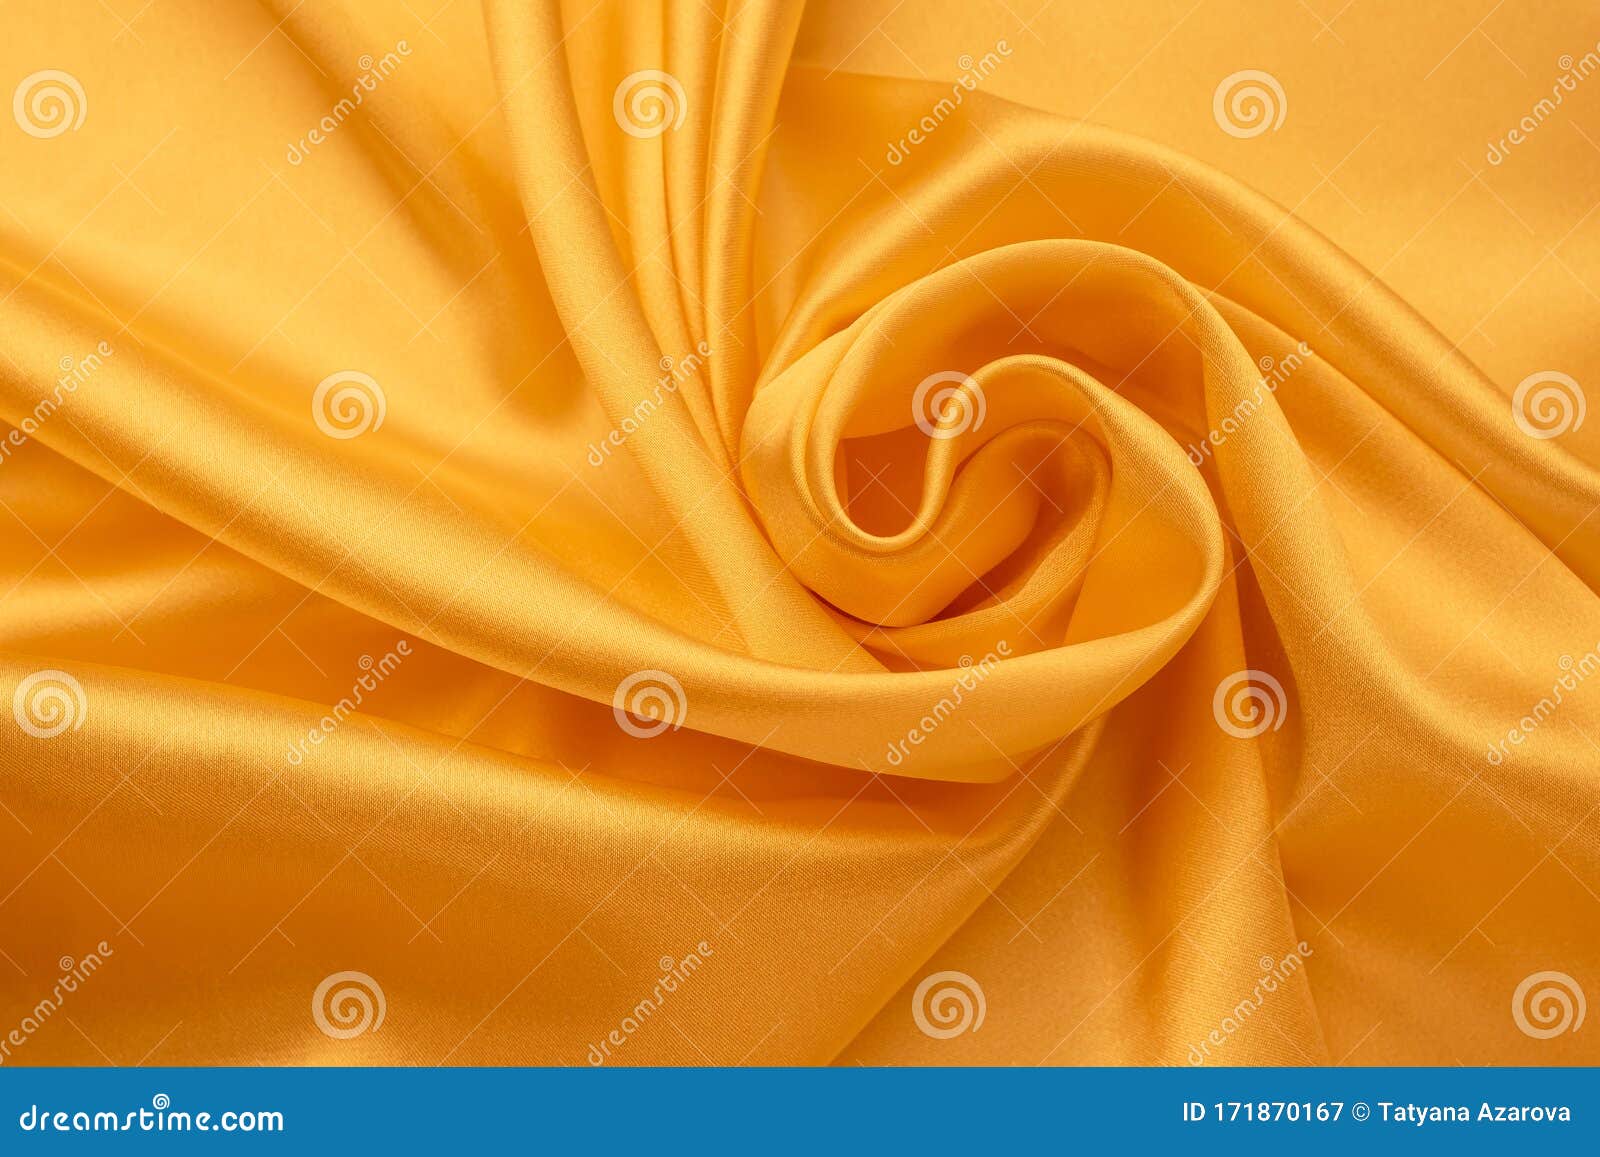 Silk Fabric Satin Texture Background, Silk, Cloth, Satin Background Image  And Wallpaper for Free Download